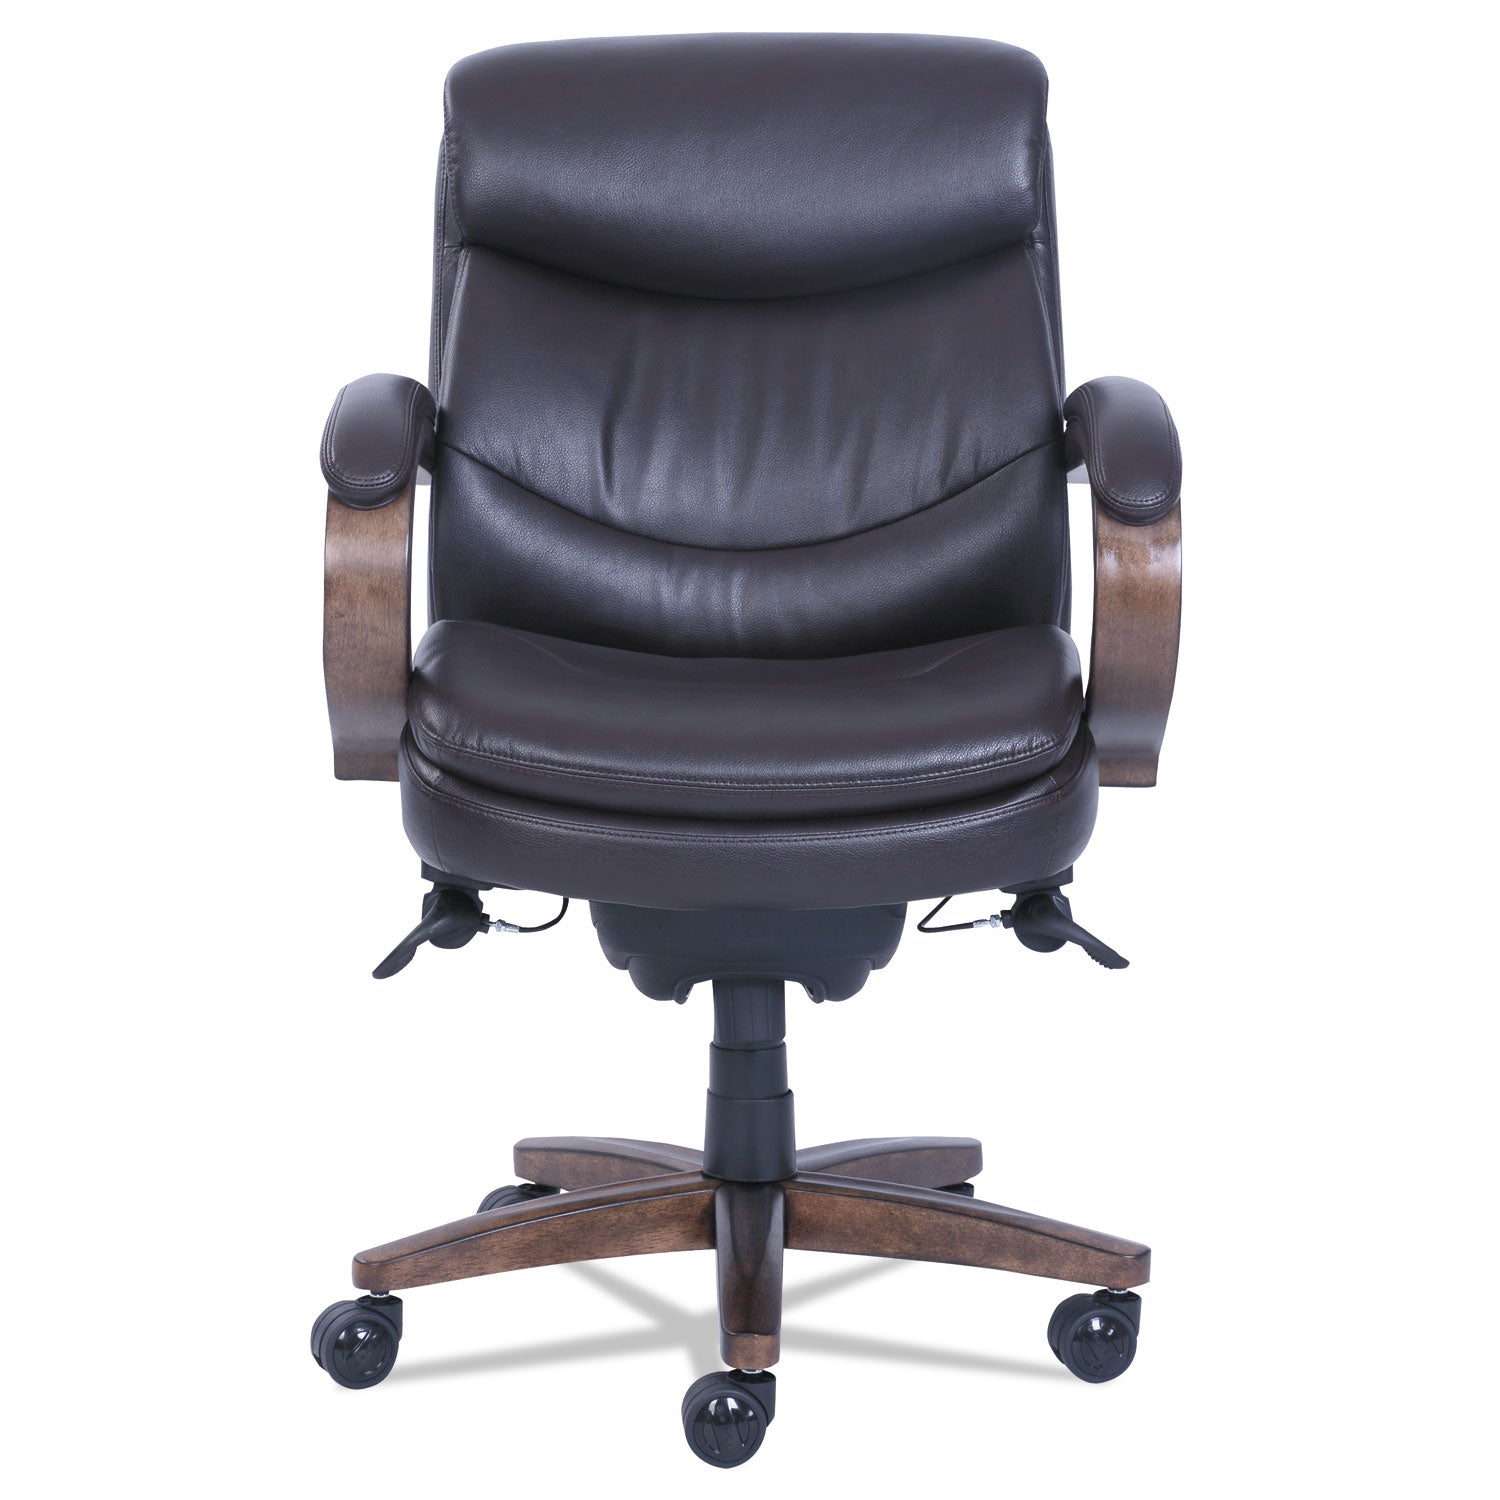 woodbury-mid-back-executive-chair-supports-up-to-300-lb-1875-to-2175-seat-height-brown-seat-back-weathered-sand-base_lzb48963b - 2